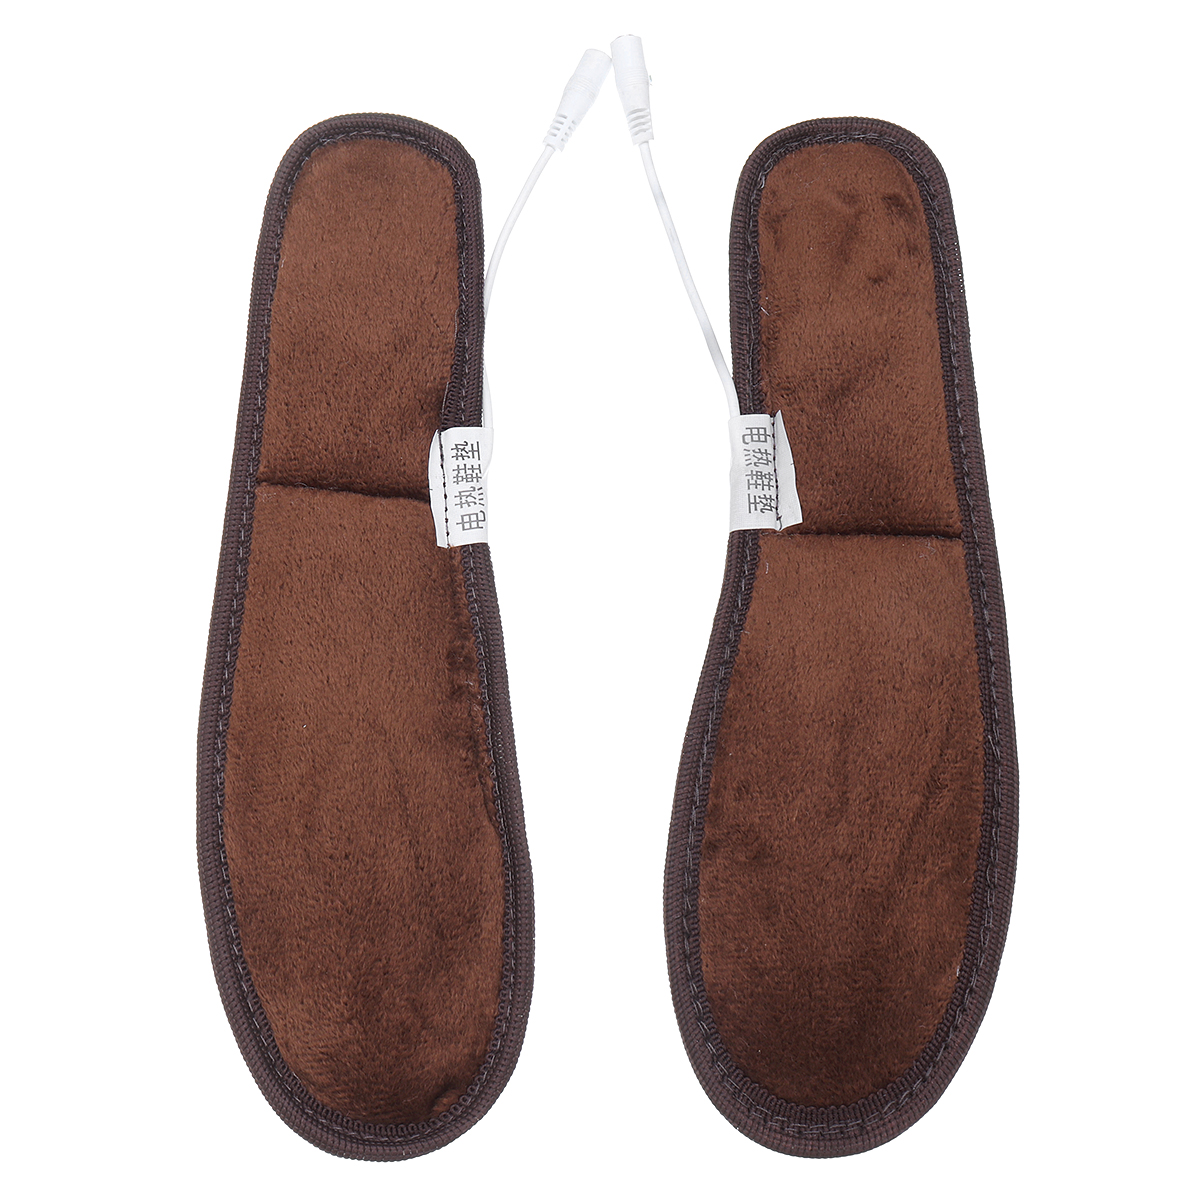 Electric-Heating-Insoles-Foot-Heater-Winter-Snow-Warm-Soft-USB-Warmer-Pads-1417421